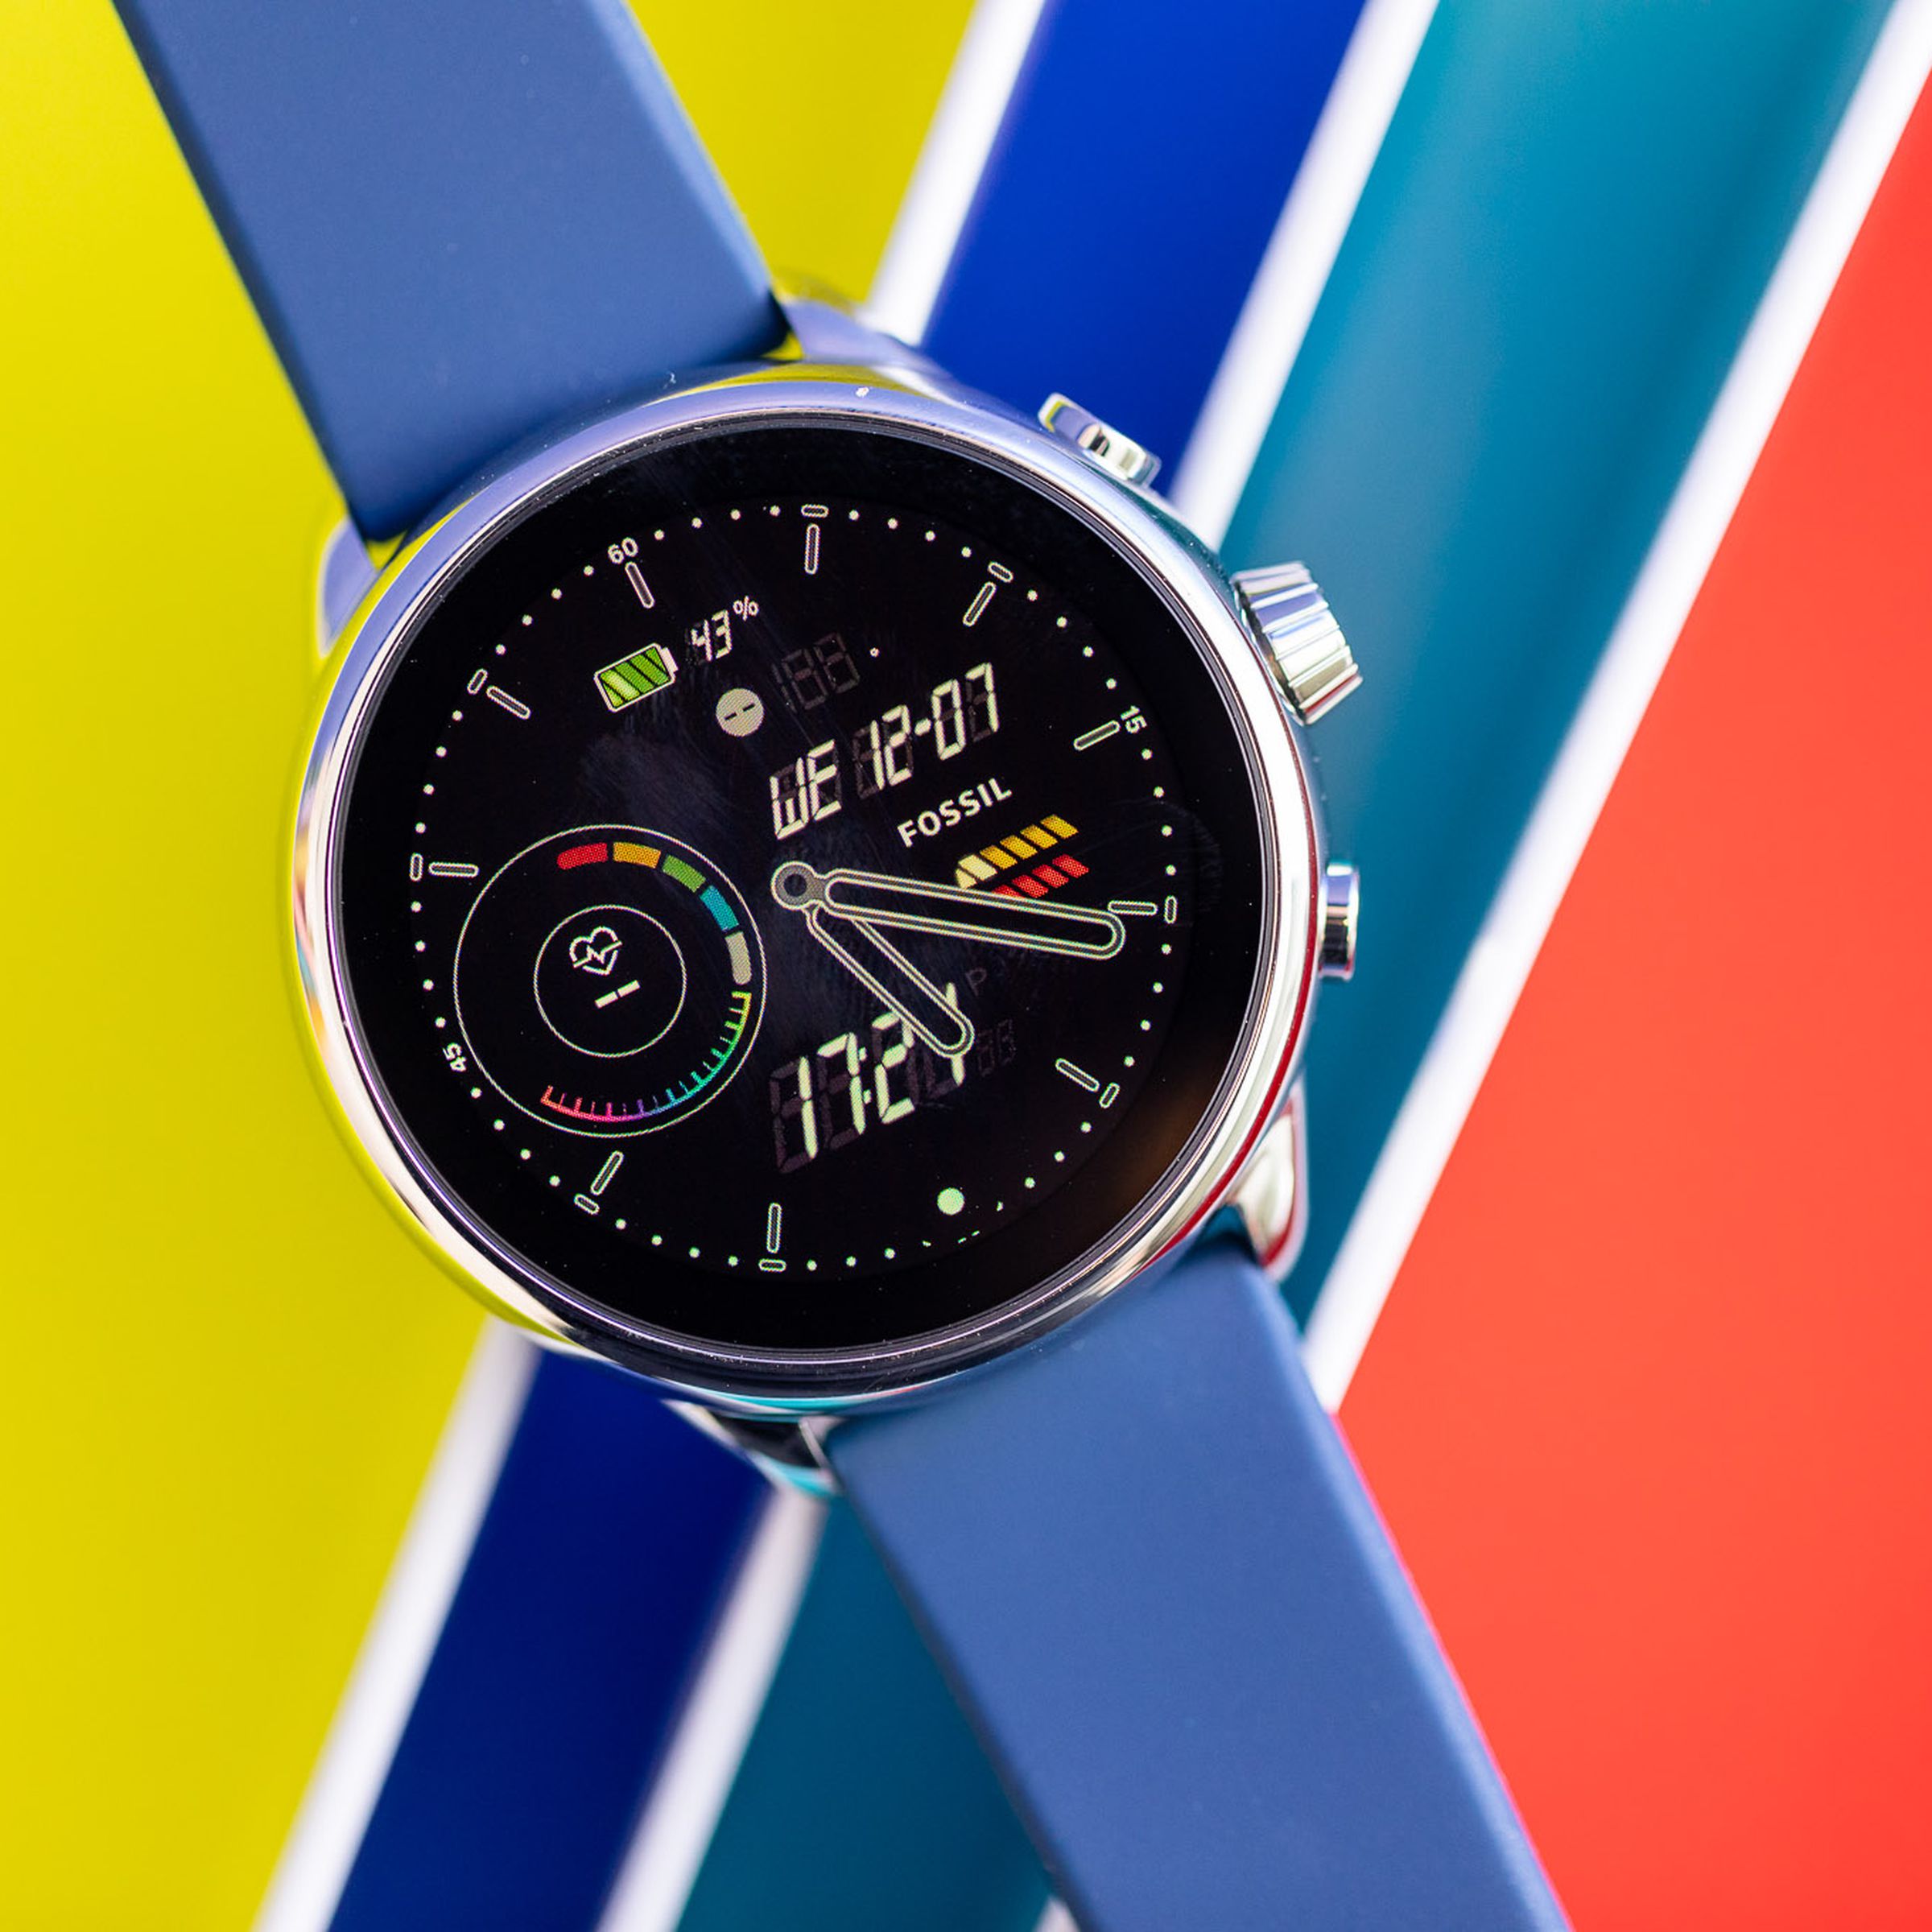 The Fossil Gen 6 Wellness Edition against a colorful background